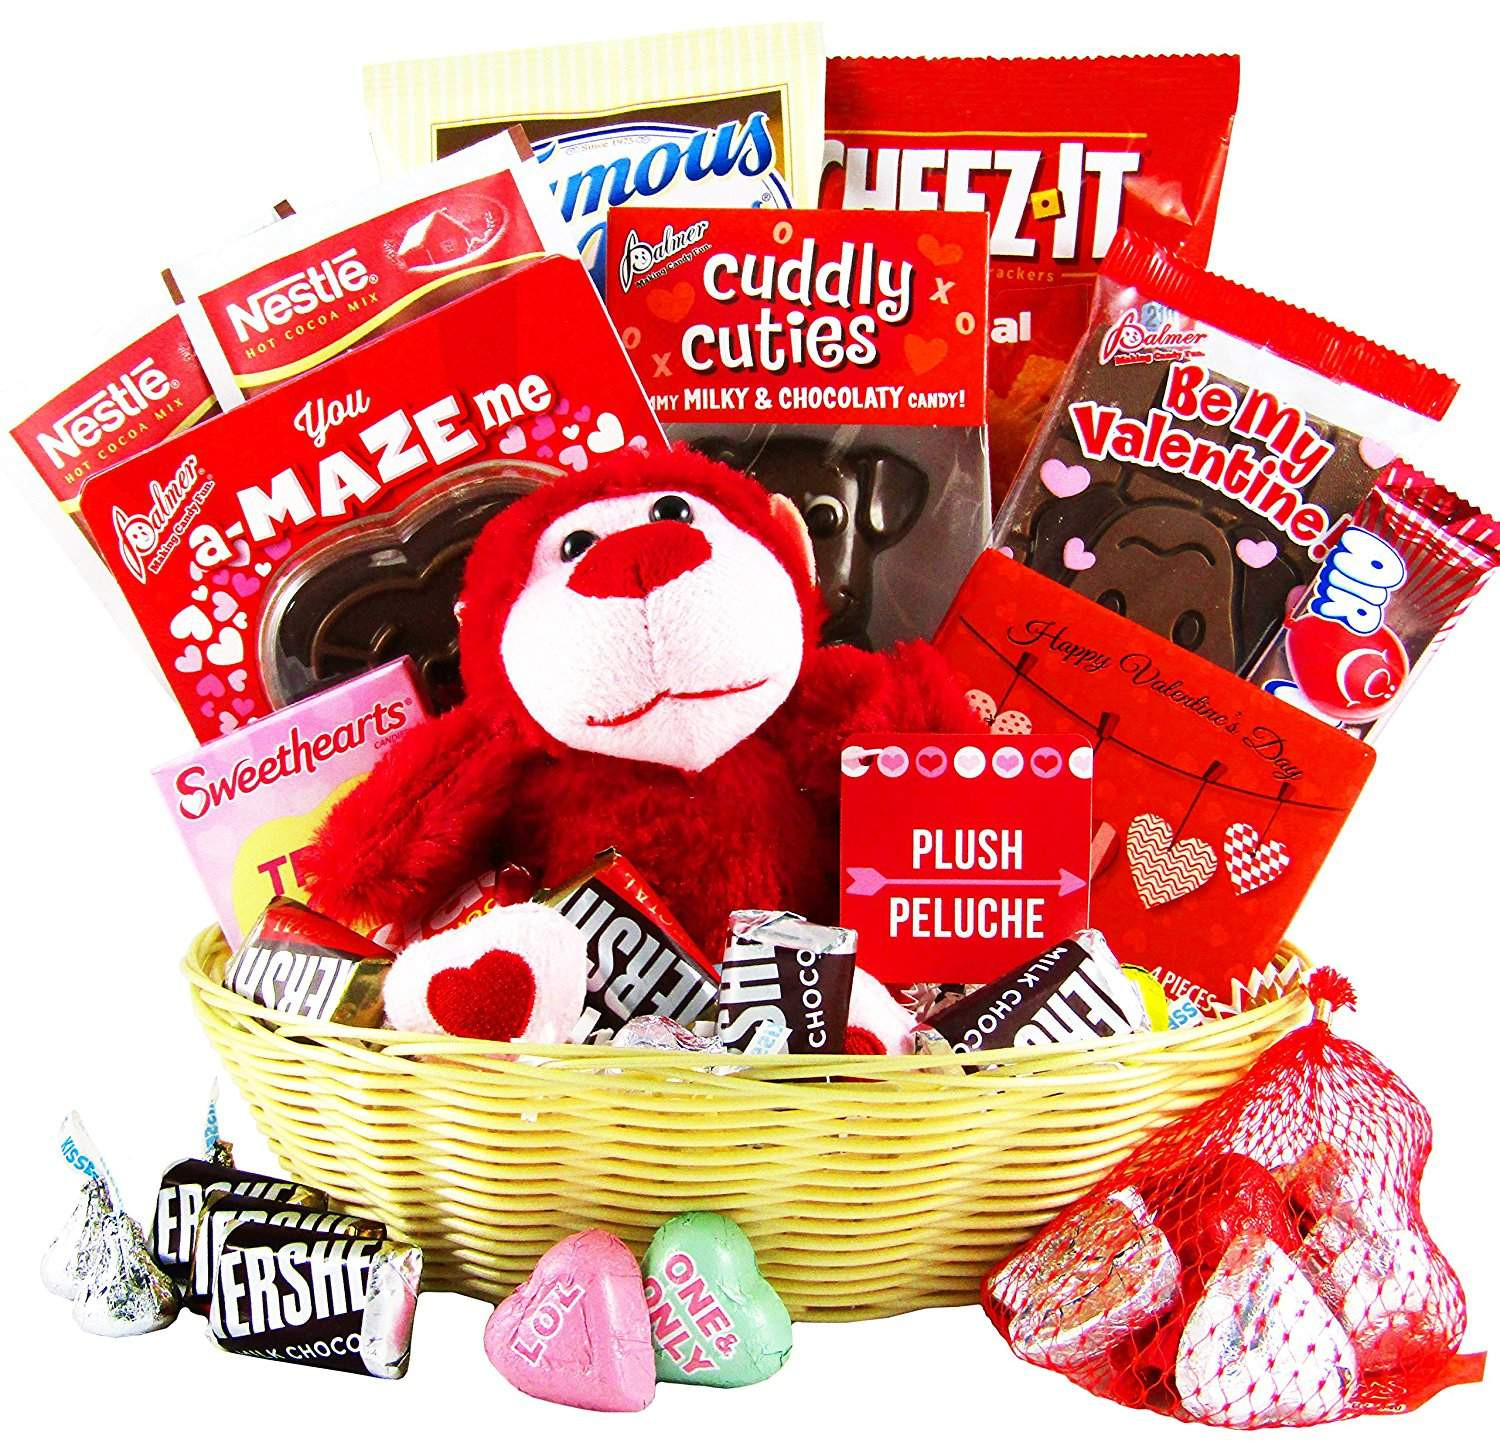 Valentines Day Candy Gift Ideas
 Top 10 Best Valentine’s Day Candy Gift Ideas